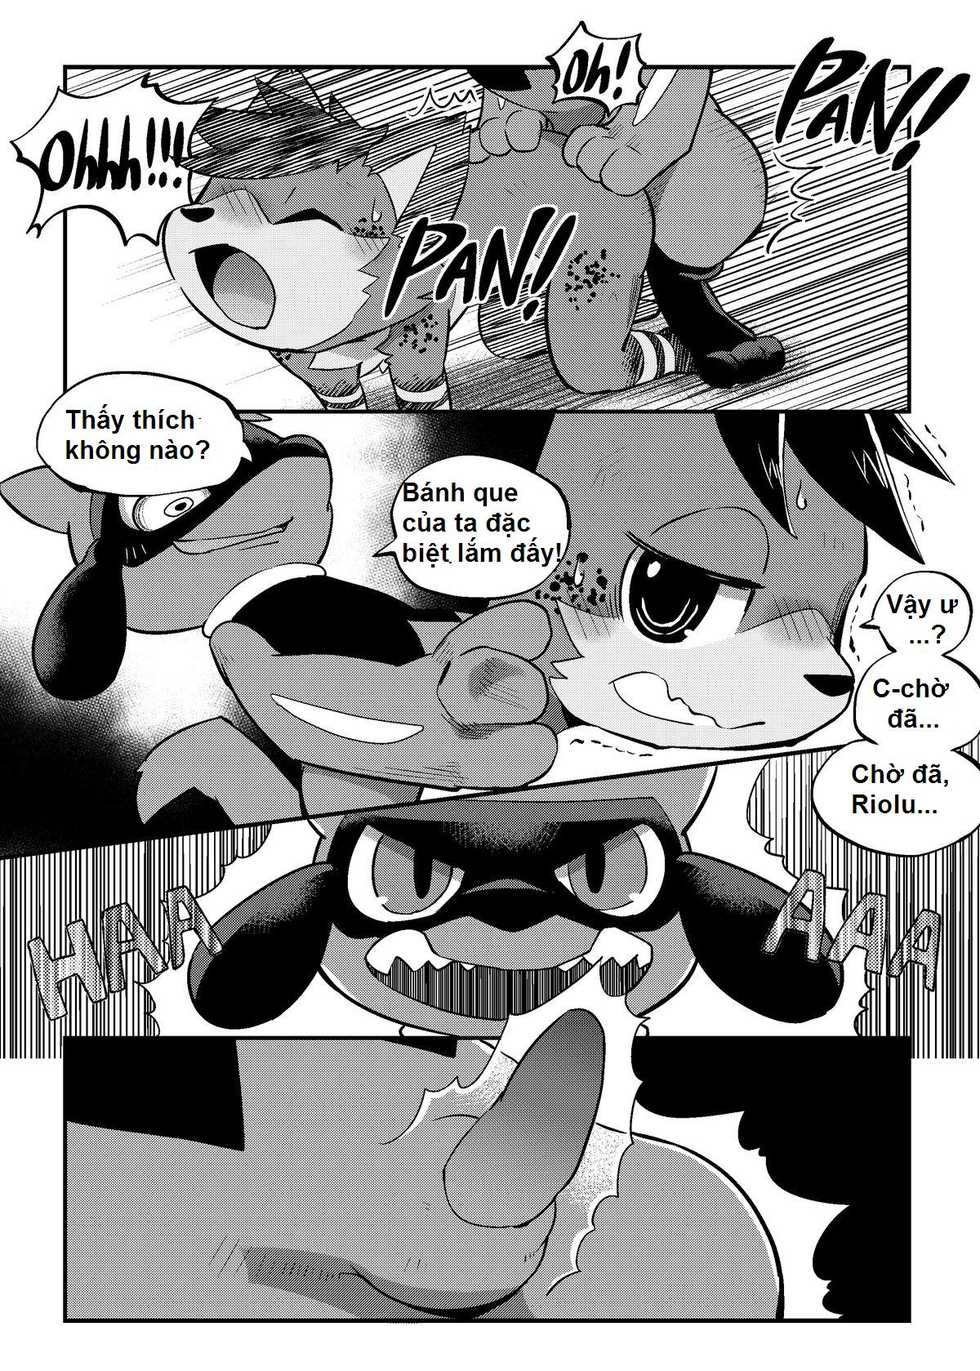 [Ofuro] High Spectacle! (Pokemon) - Vietnamese - Page 5